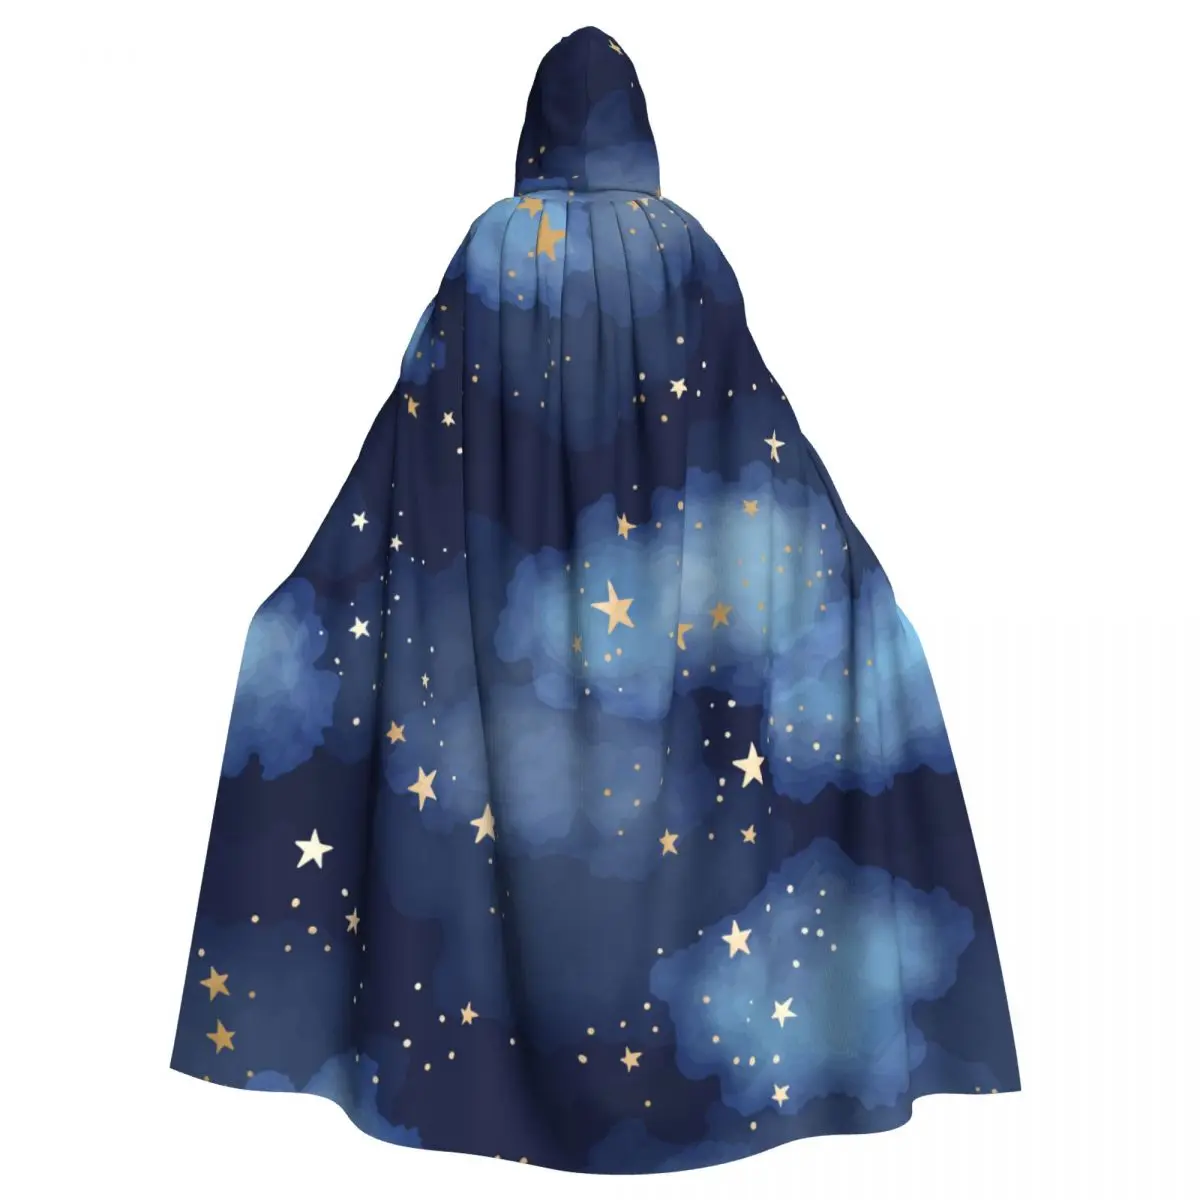 

Hooded Cloak Unisex Cloak with Hood Gold Foil Constellations Stars And Clouds Cloak Vampire Witch Cape Cosplay Costume